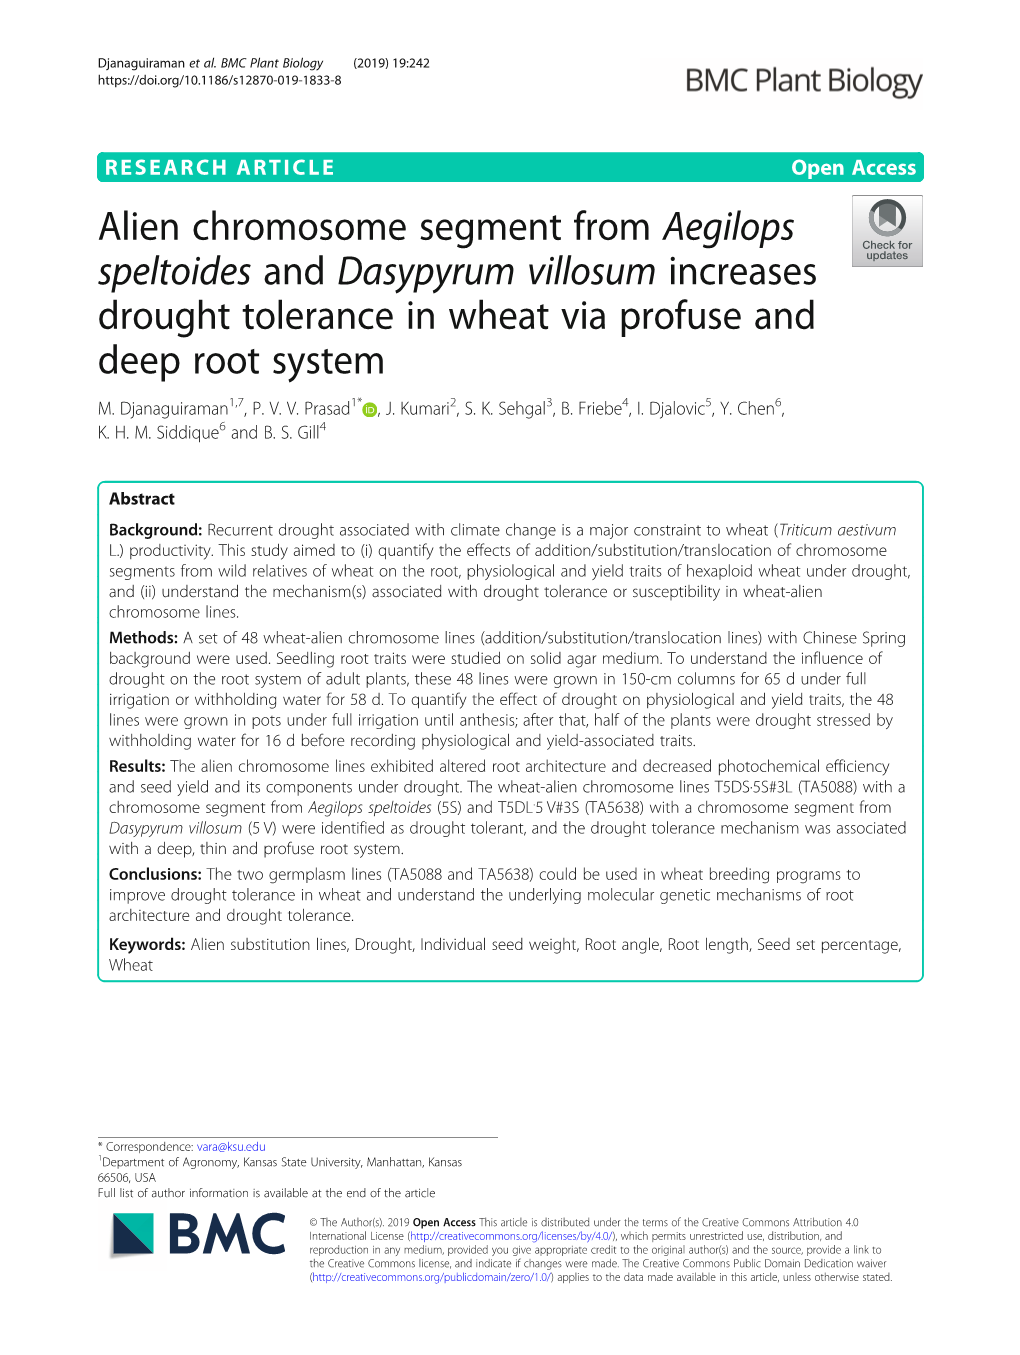 Alien Chromosome Segment from Aegilops Speltoides and Dasypyrum Villosum Increases Drought Tolerance in Wheat Via Profuse and Deep Root System M